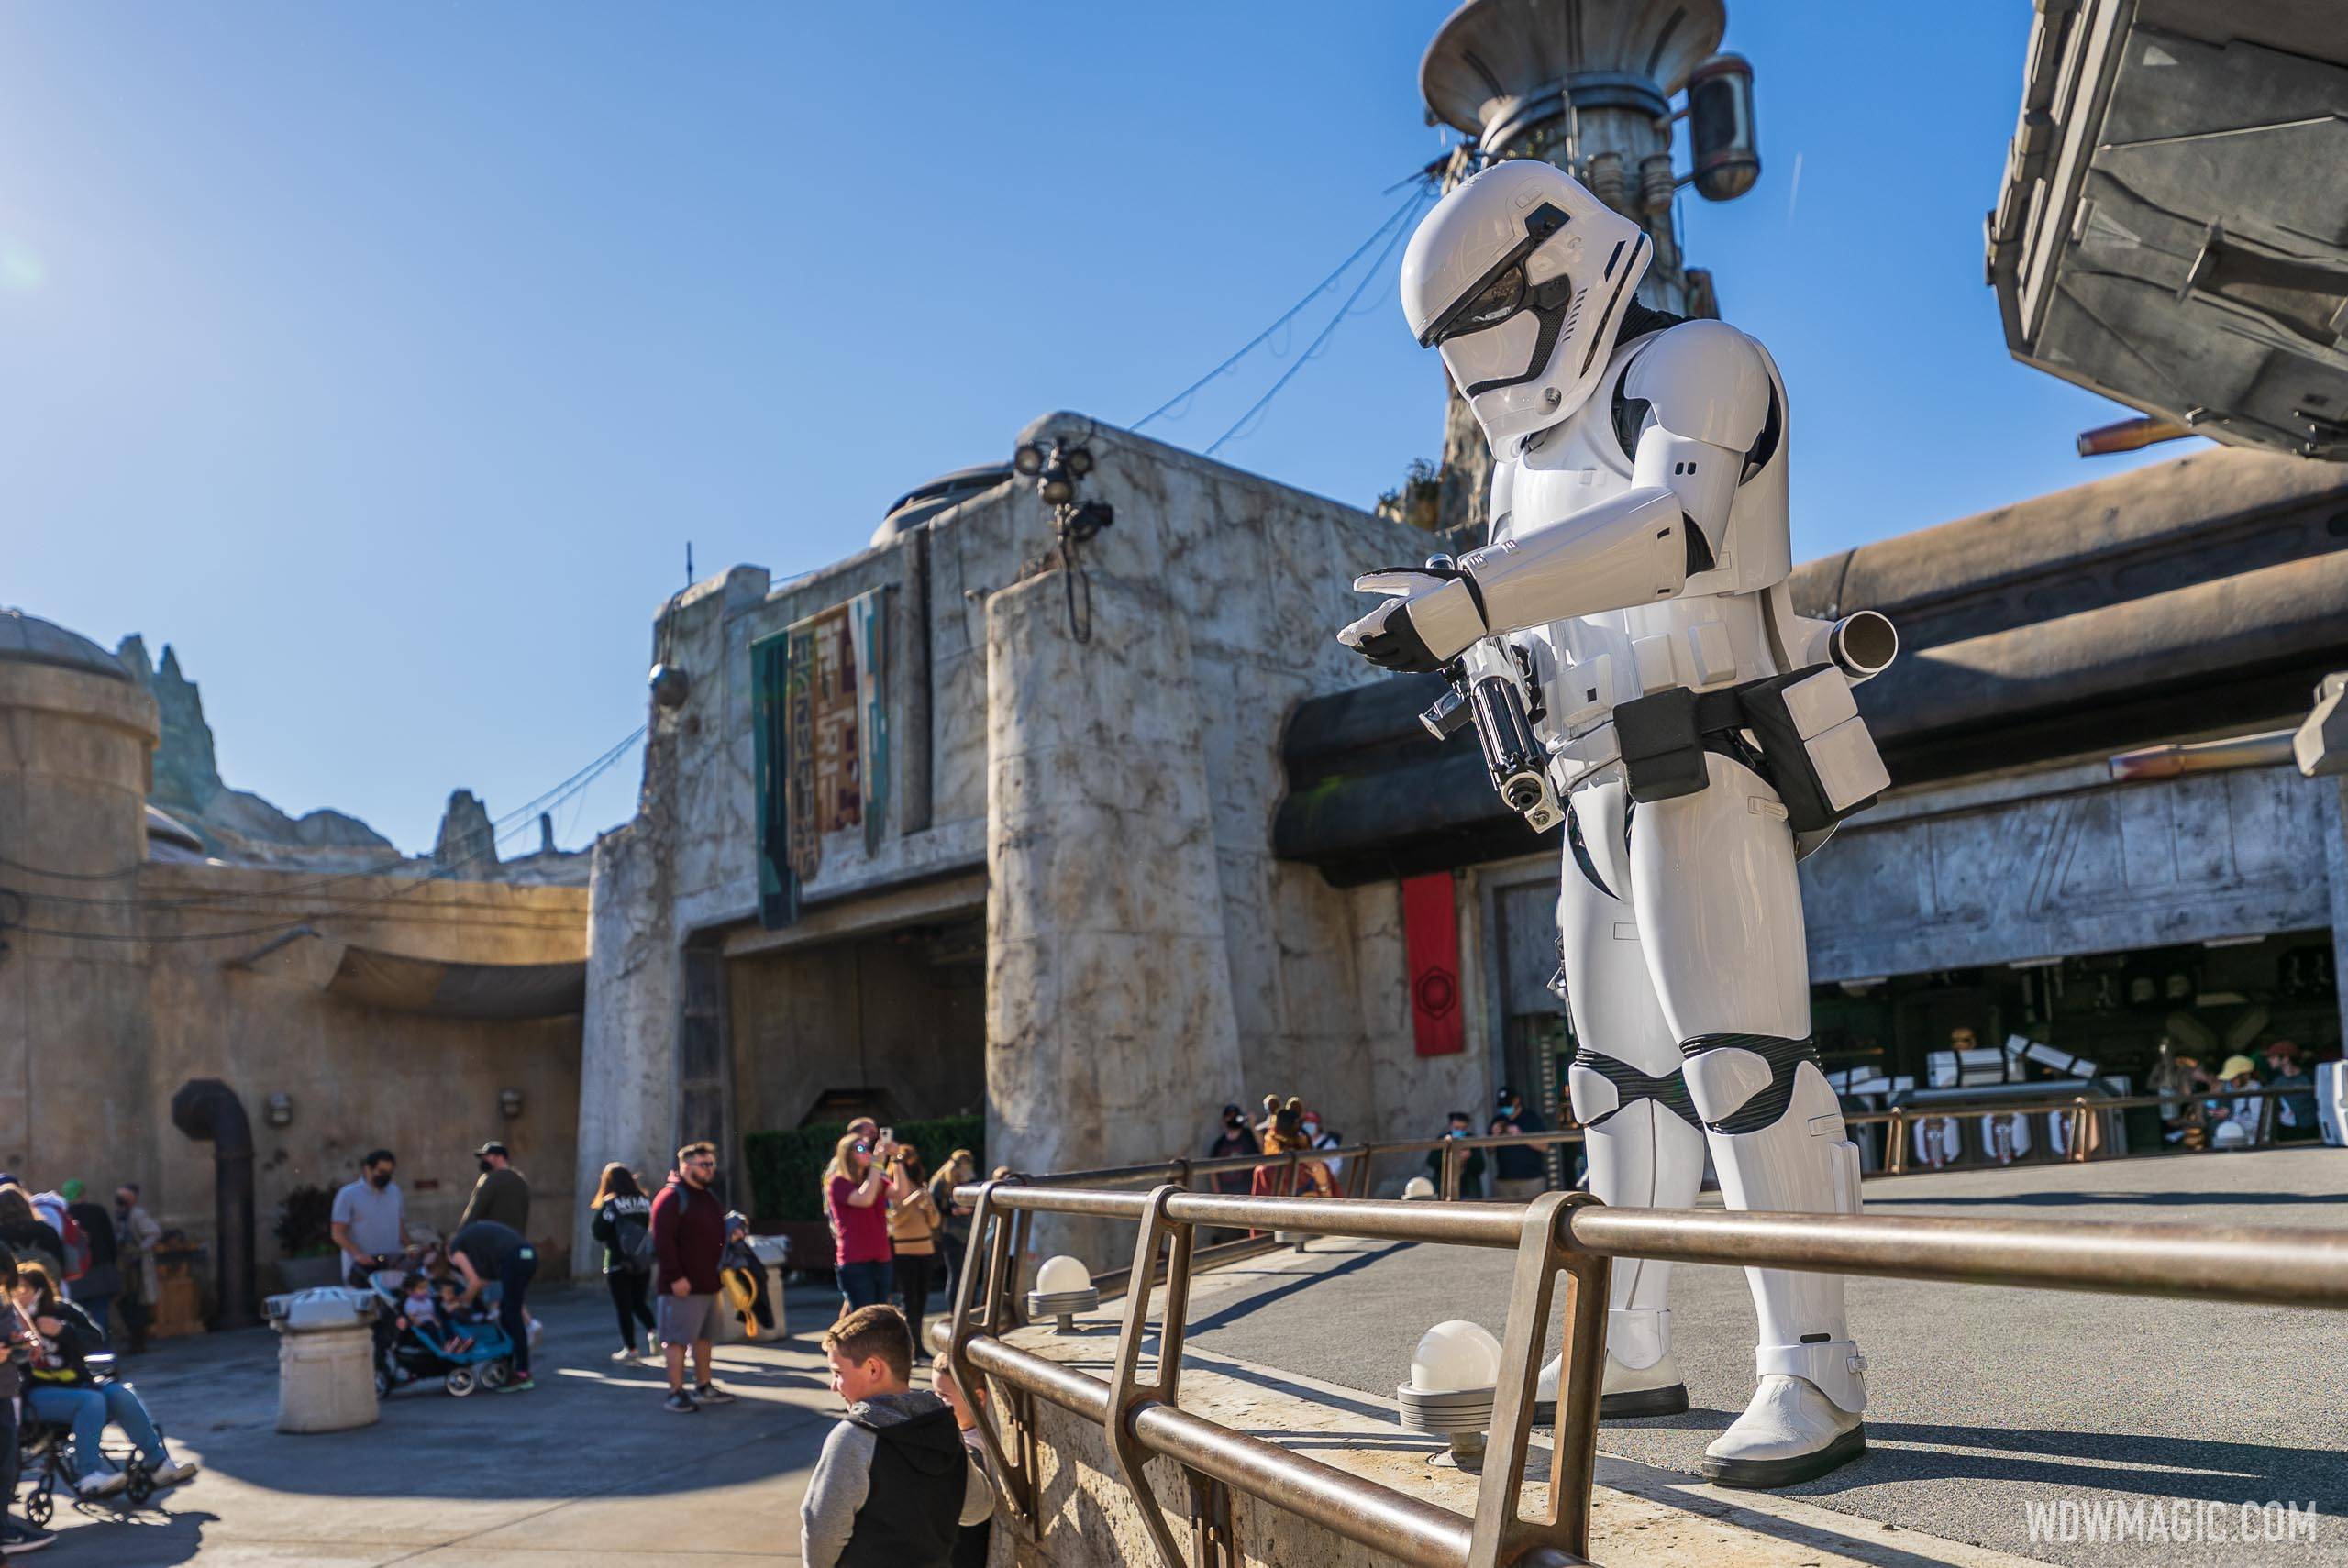 Entrance to Batuu from Galactic Starcruiser